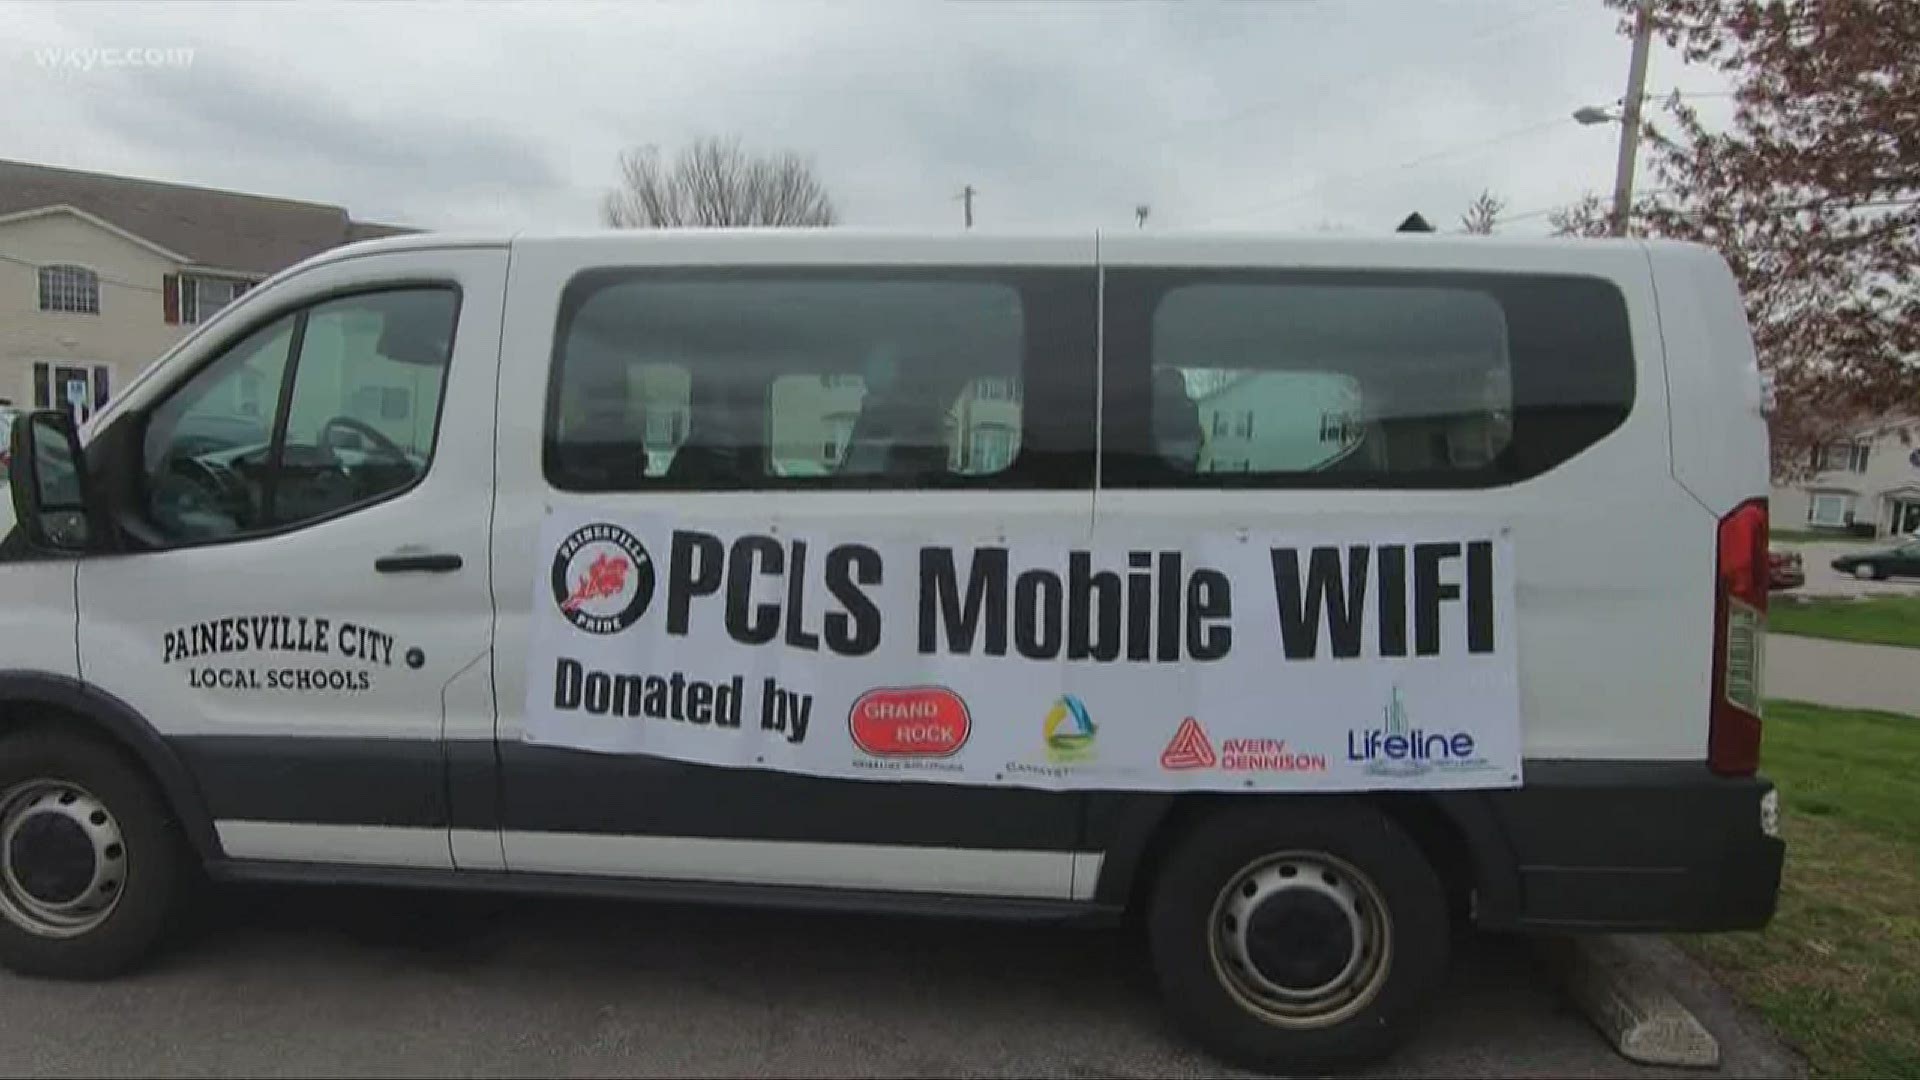 Painesville City Schools have been driving mobile hot spots around in vans. They're providing internet access to students without it.